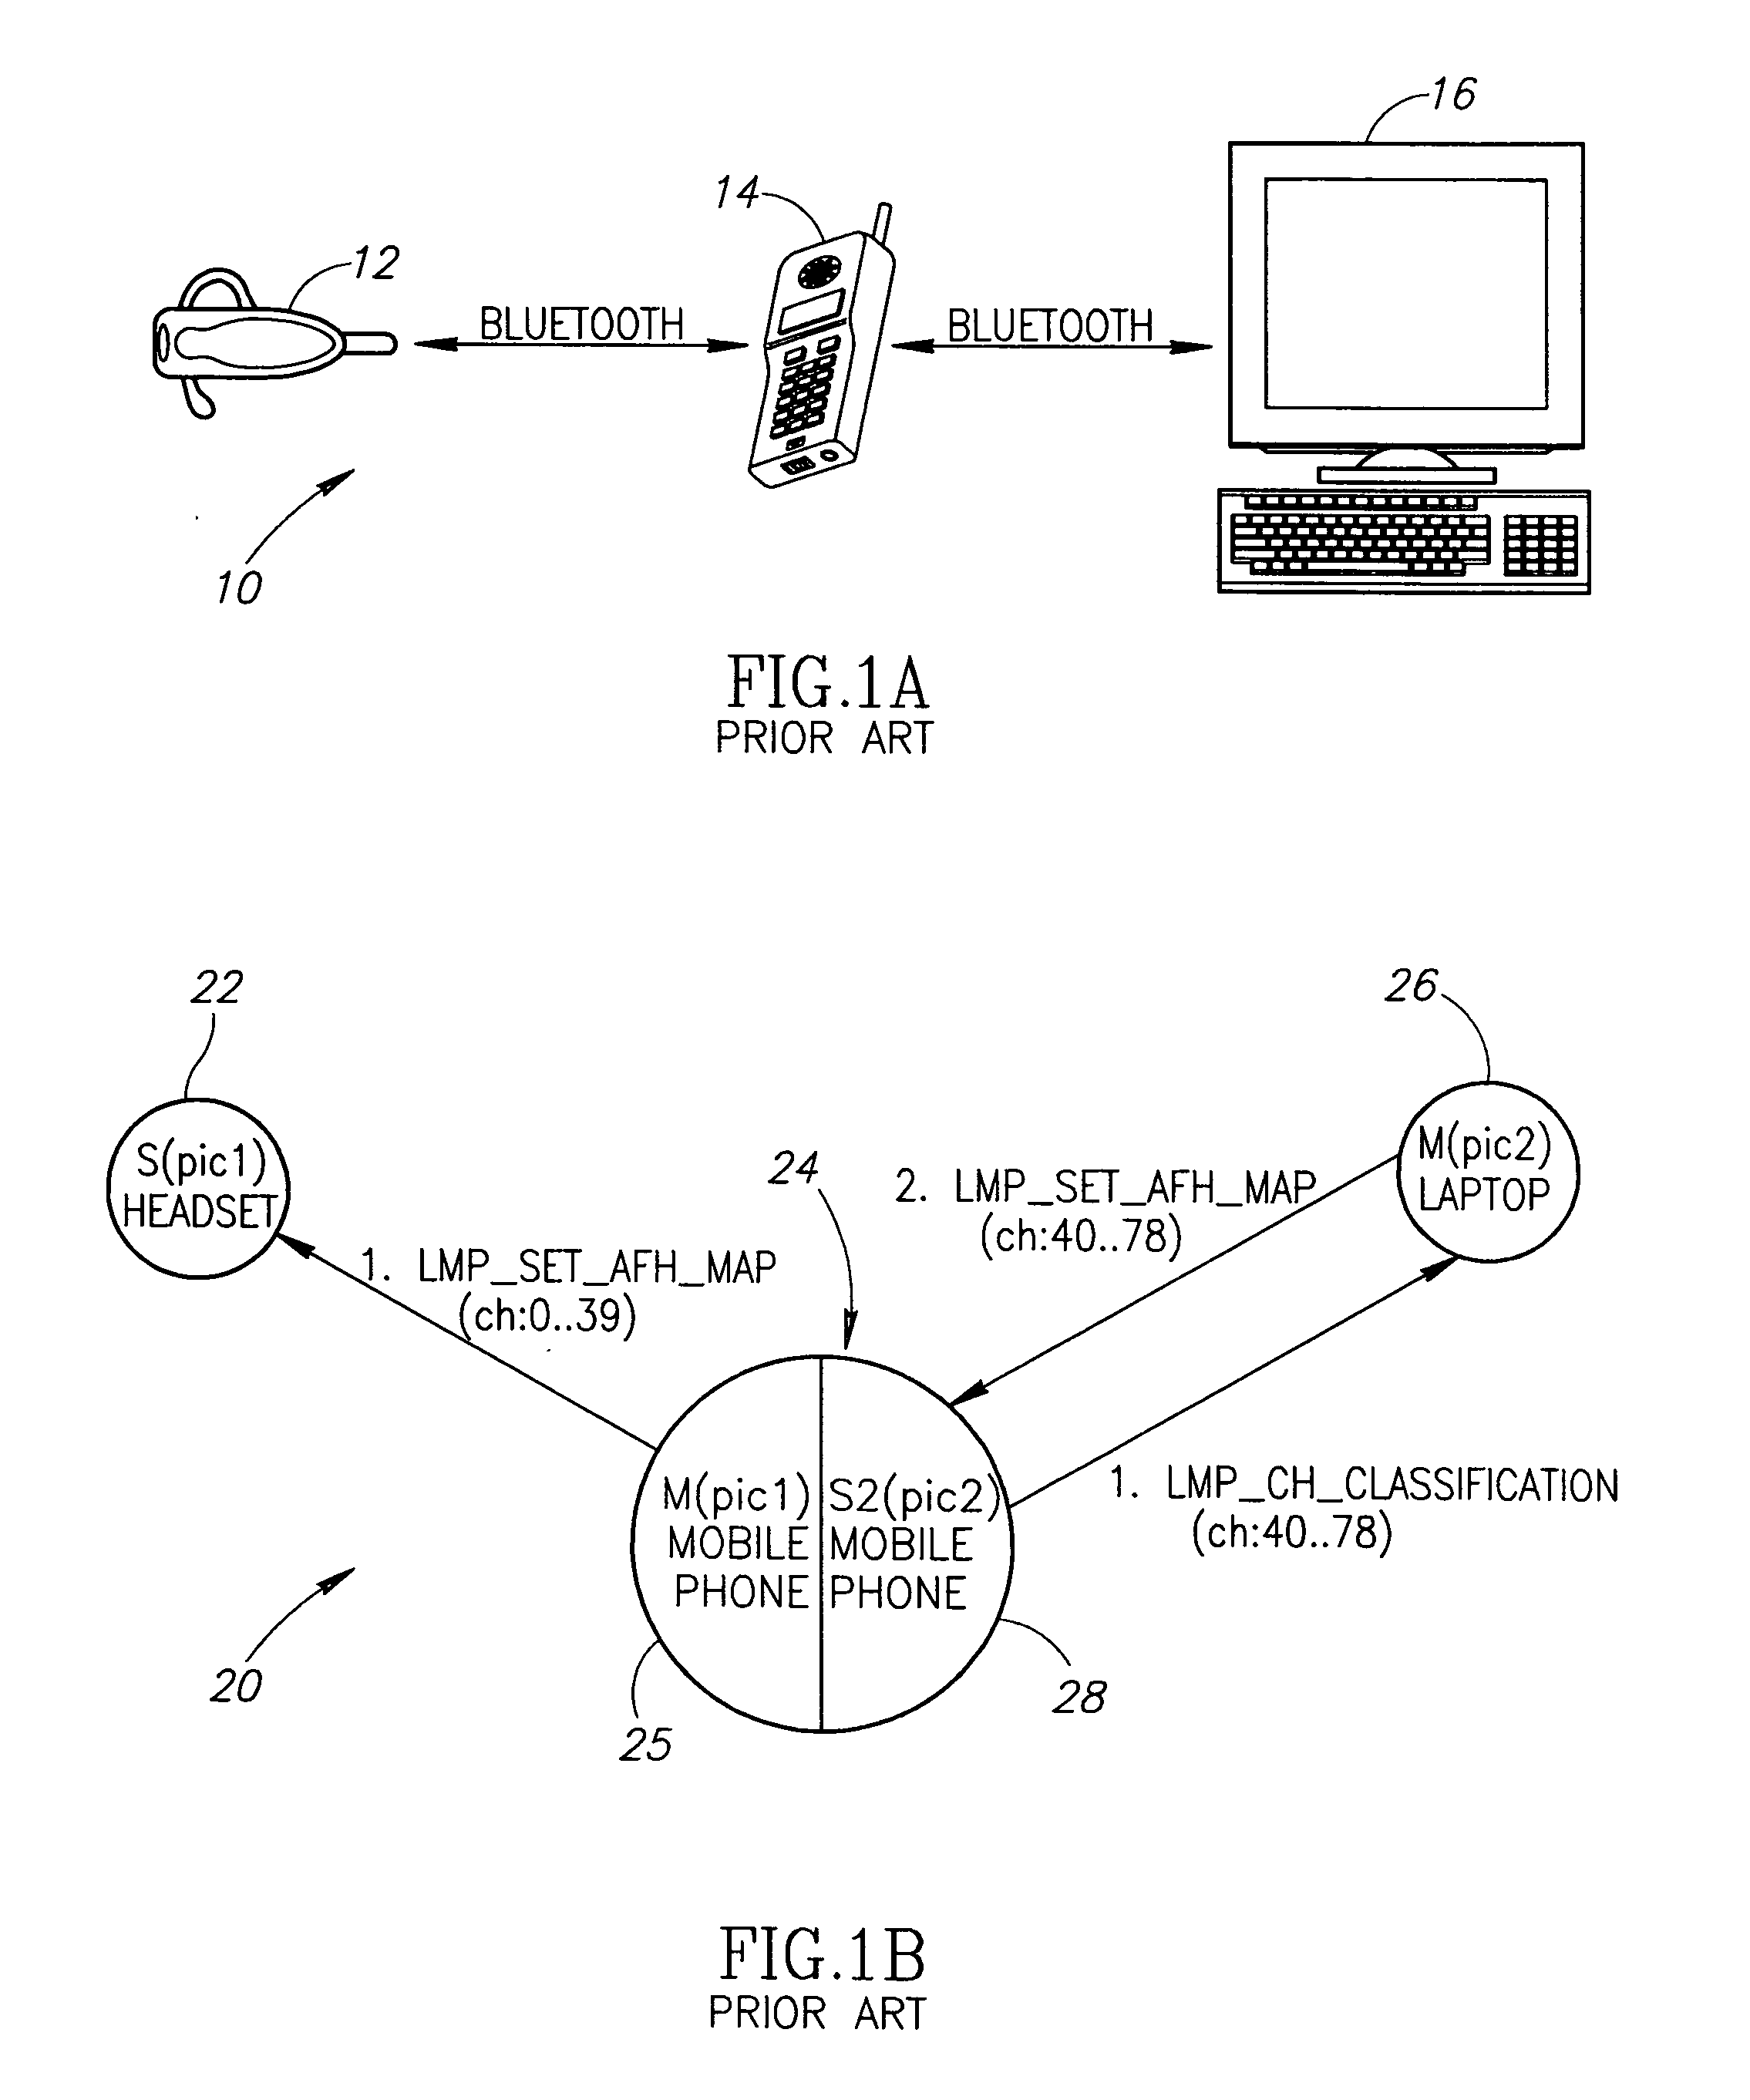 Radio frequency collision avoidance mechanism in wireless networks using frequency synchronization